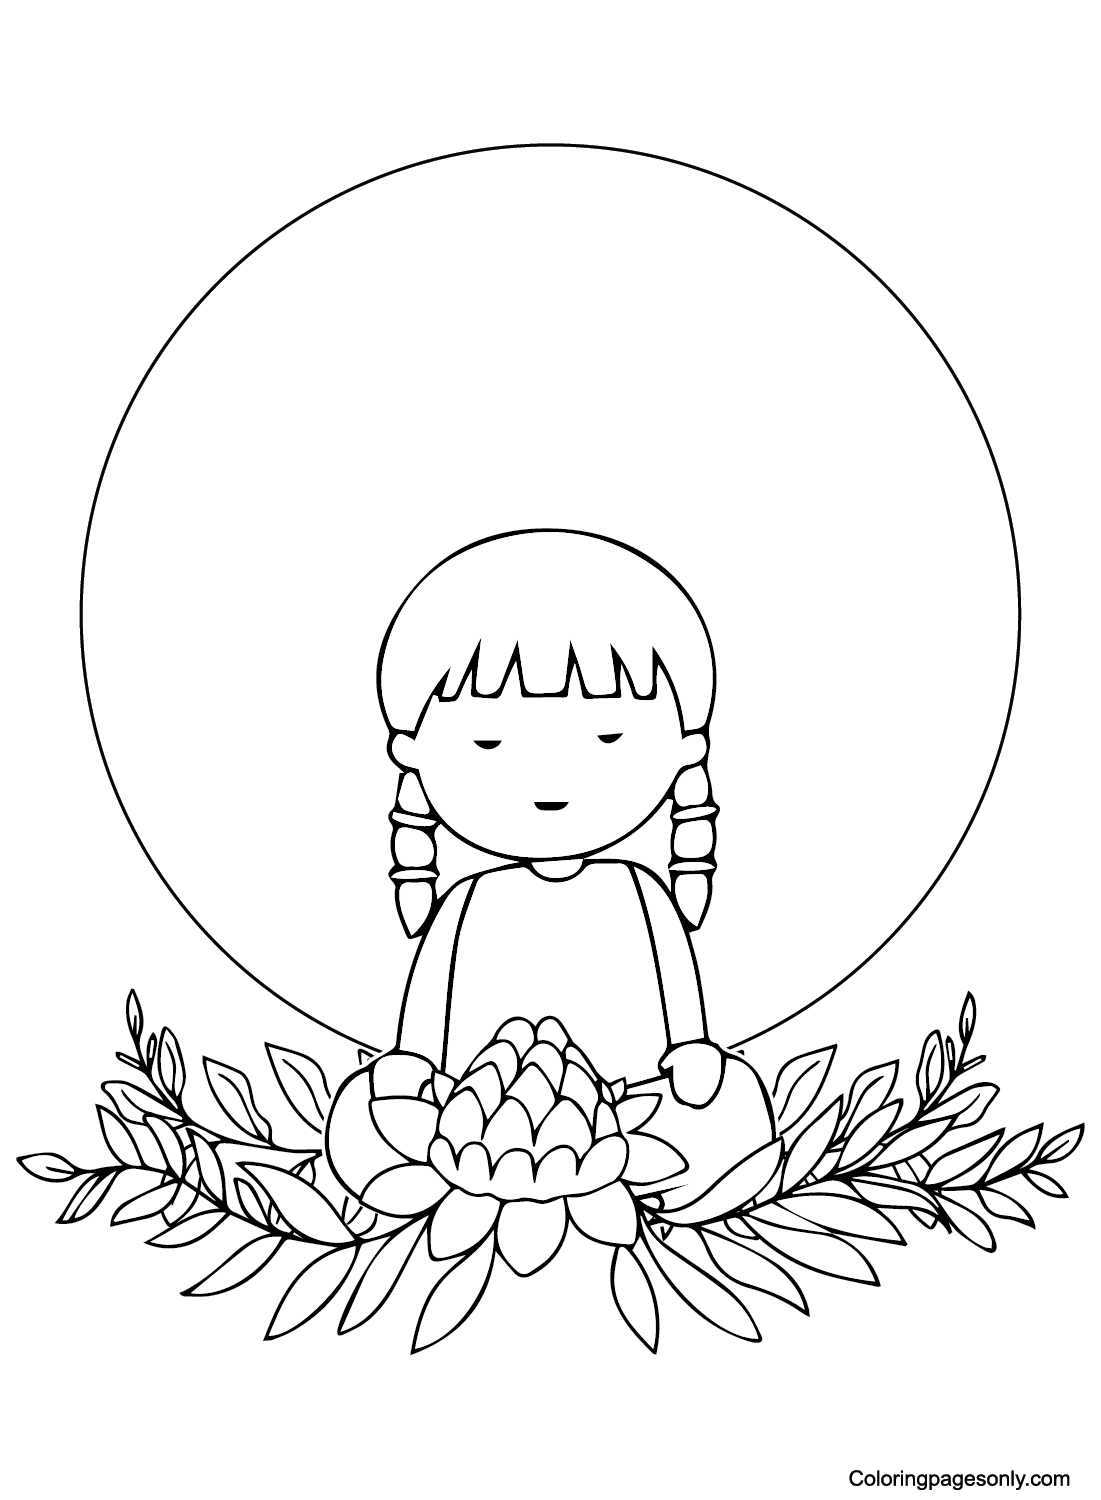 Free Mindfulness Pictures Coloring Page